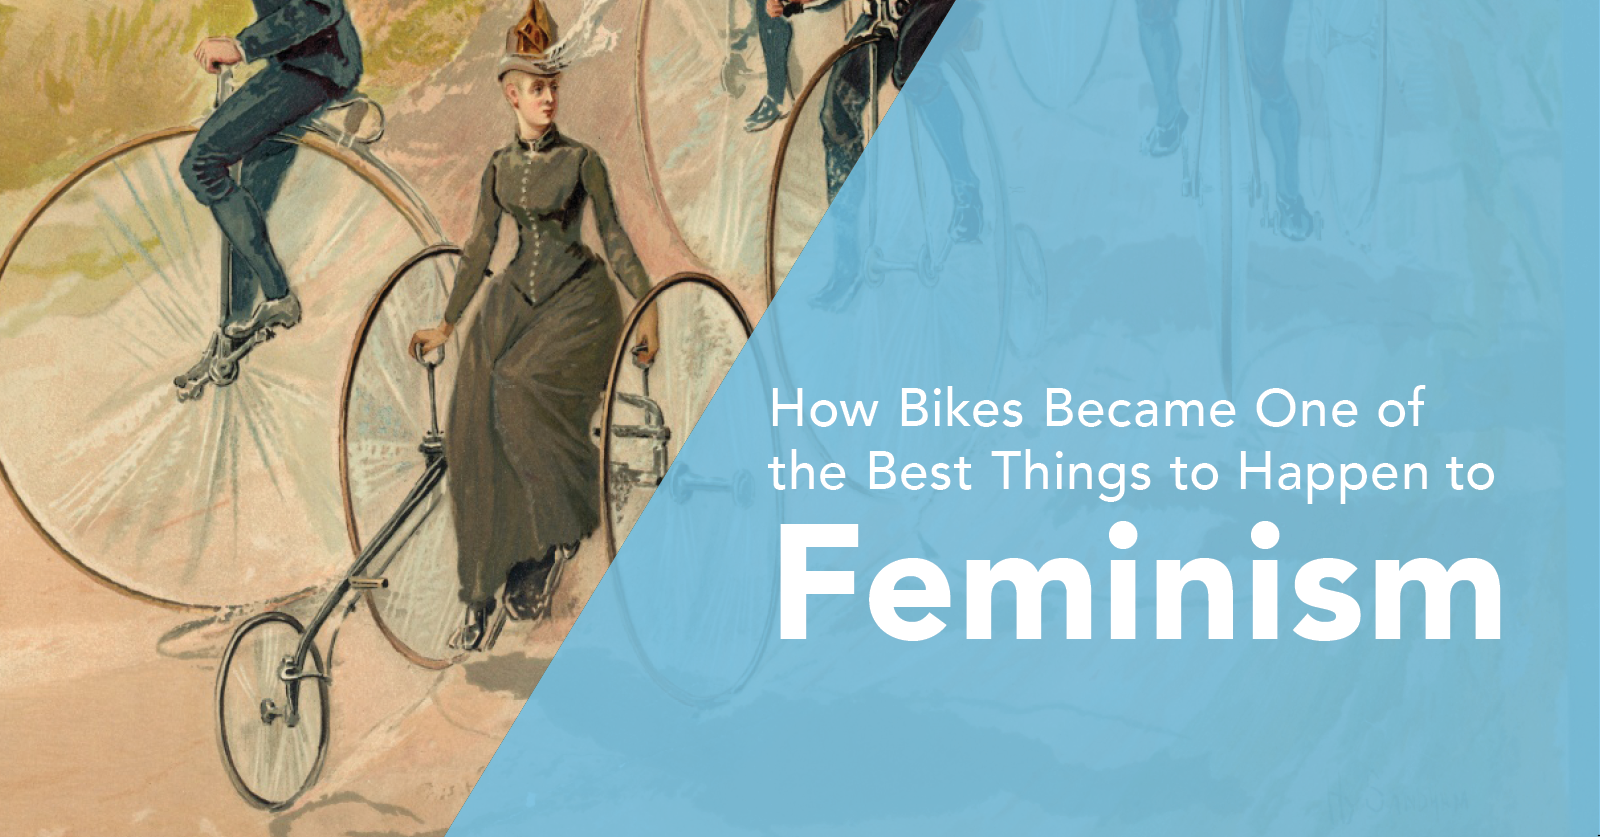 How bikes became one of the best things to happen to feminism